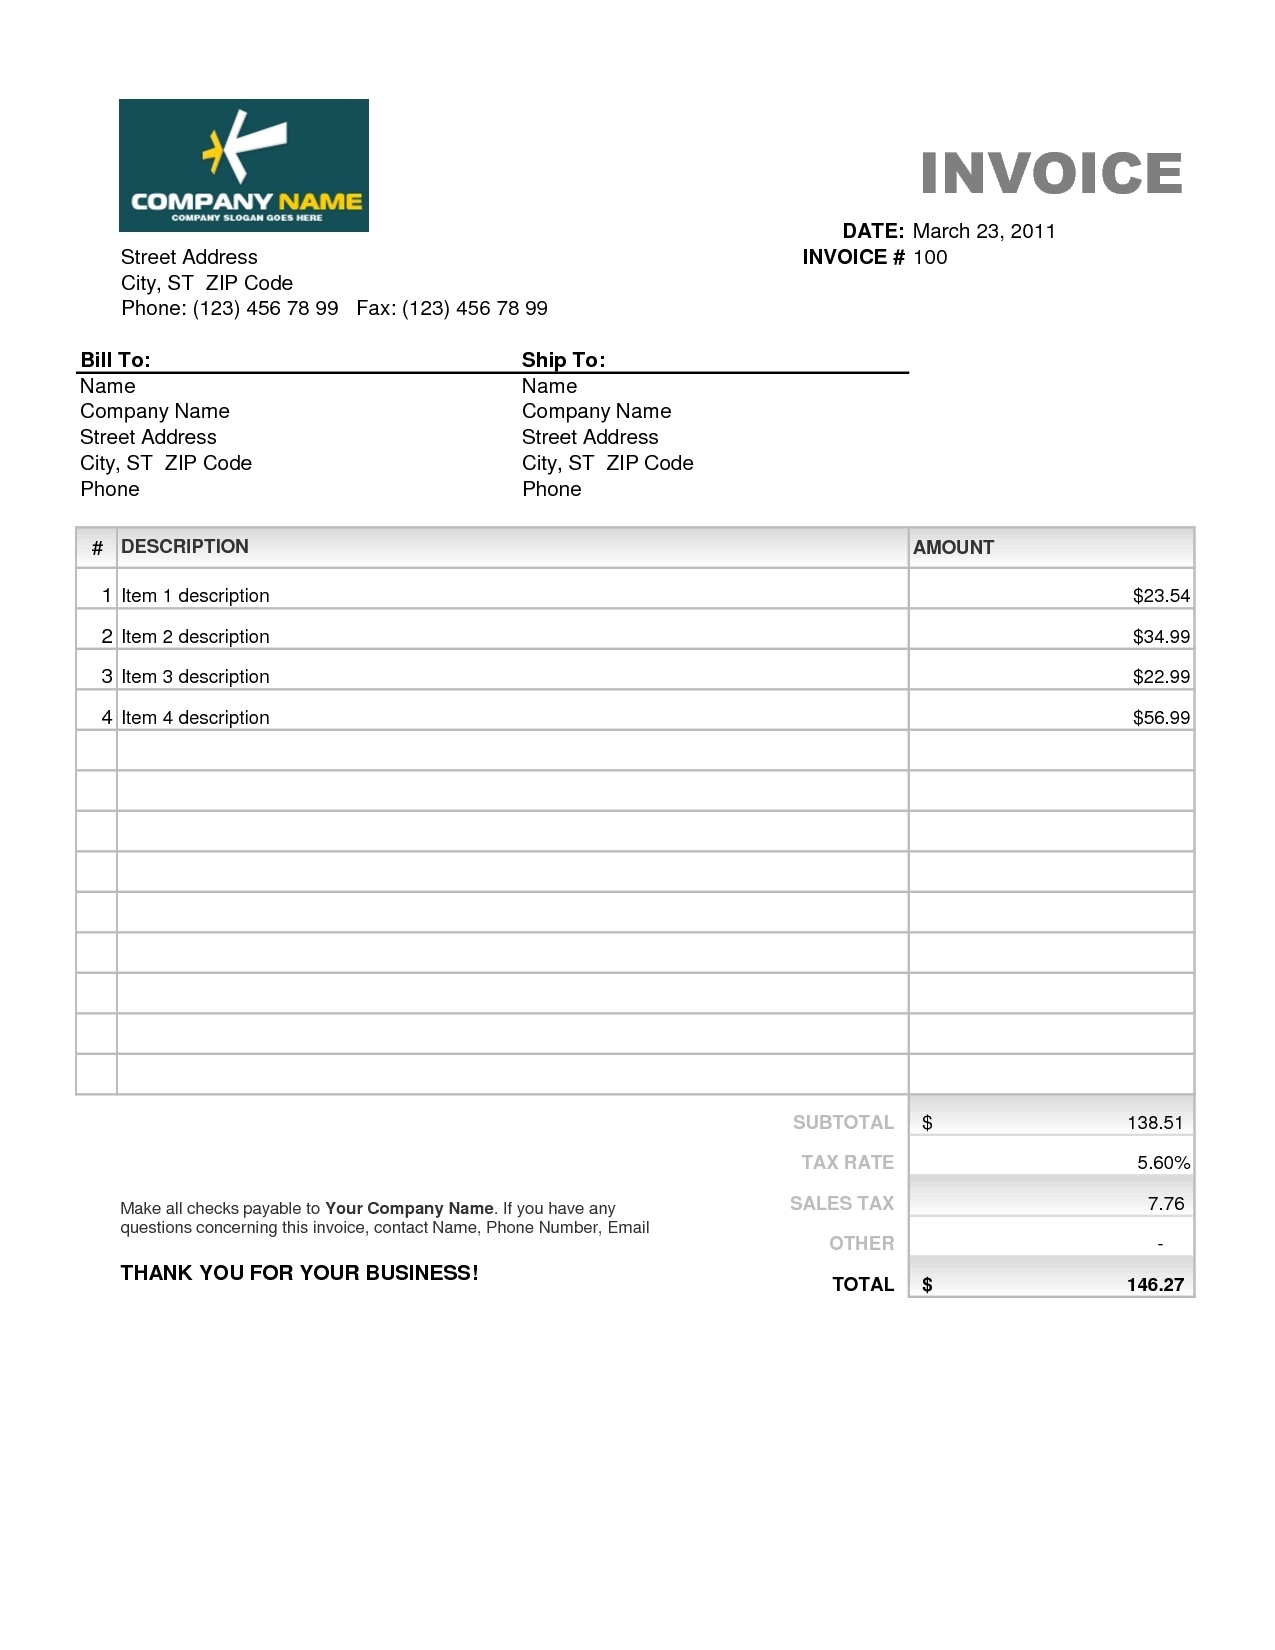 invoice download free invoice template ideas free invoice downloads